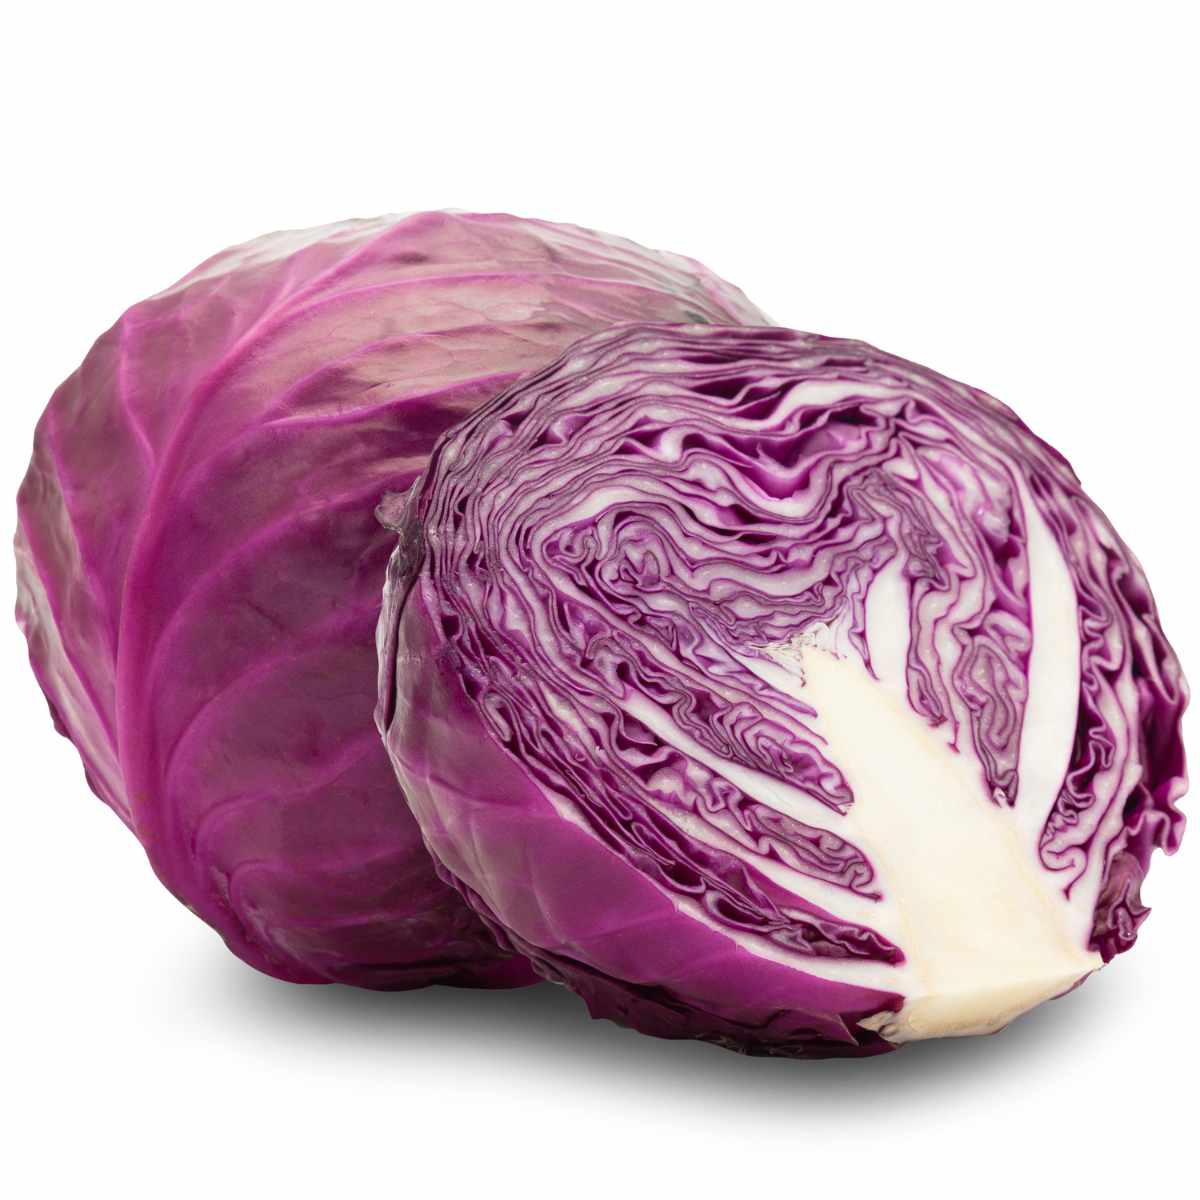 red cabbage sliced open and on a white background.